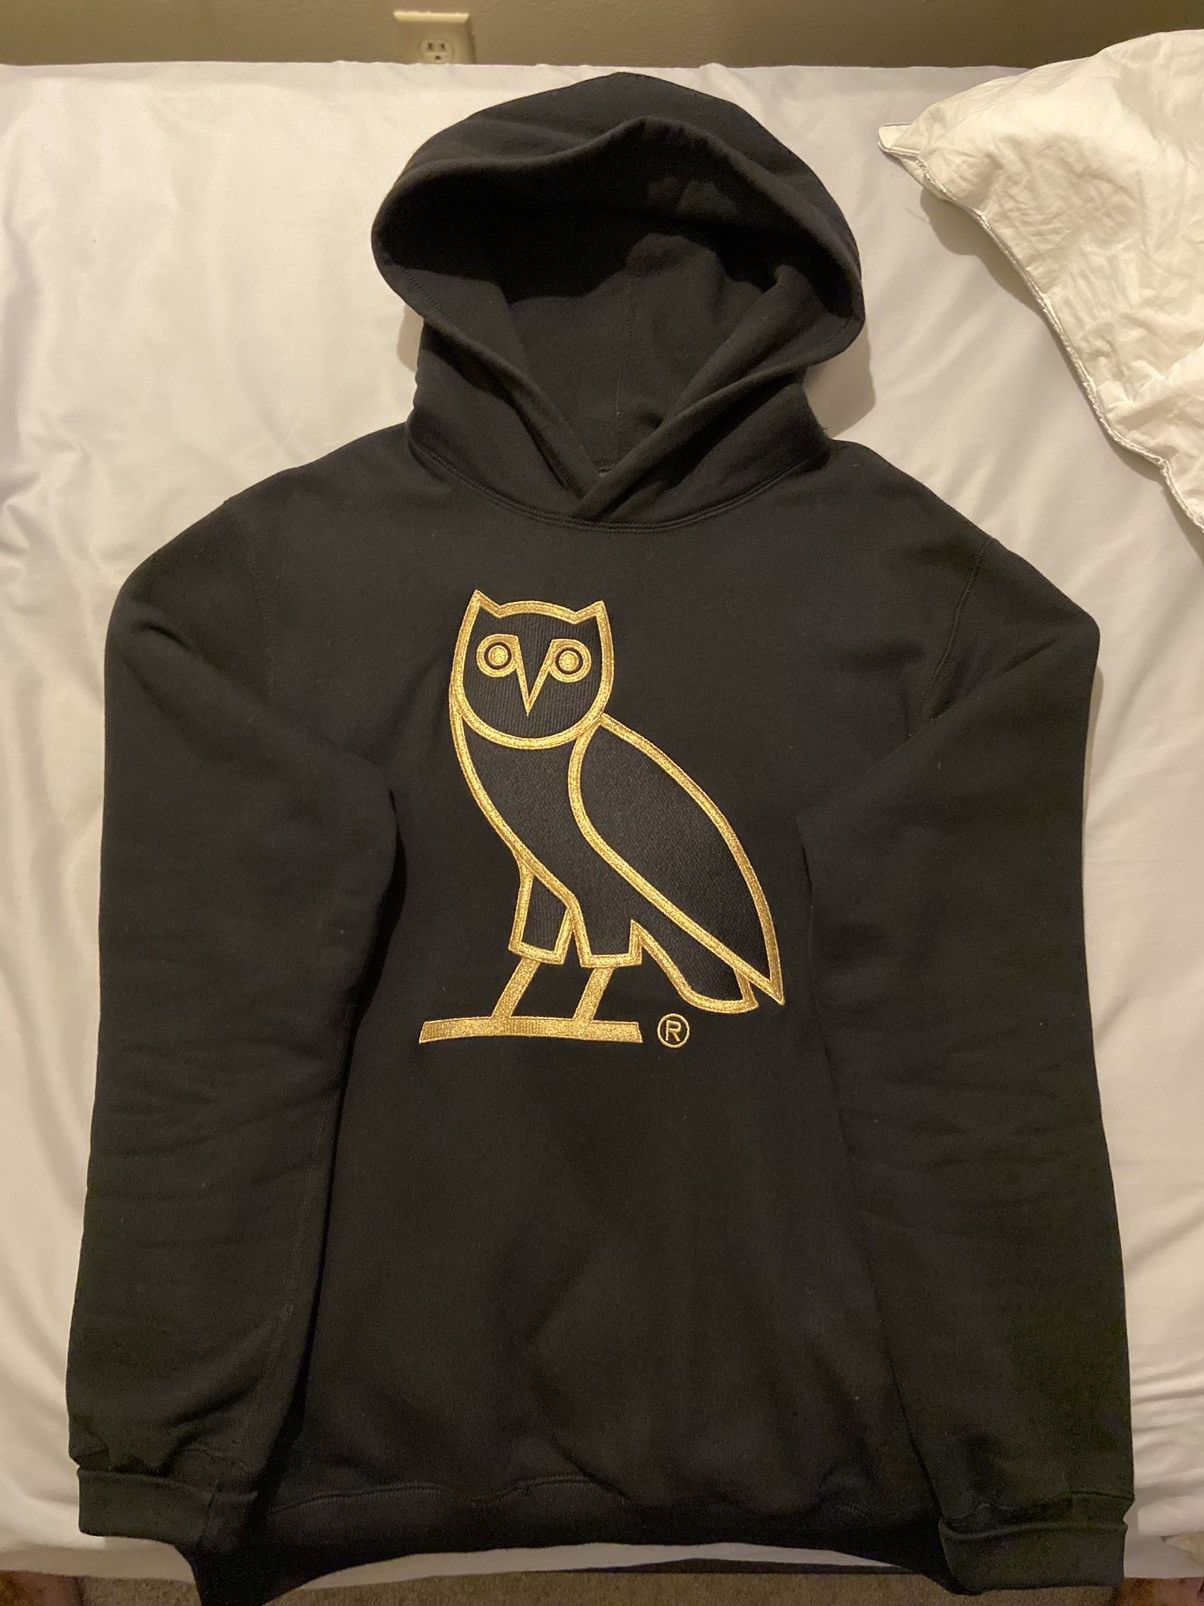 Octobers Very Own Drake OVO OG Owl Hoodie Gold Embroidered Black Size US L / EU 52-54 / 3 - 2 Preview